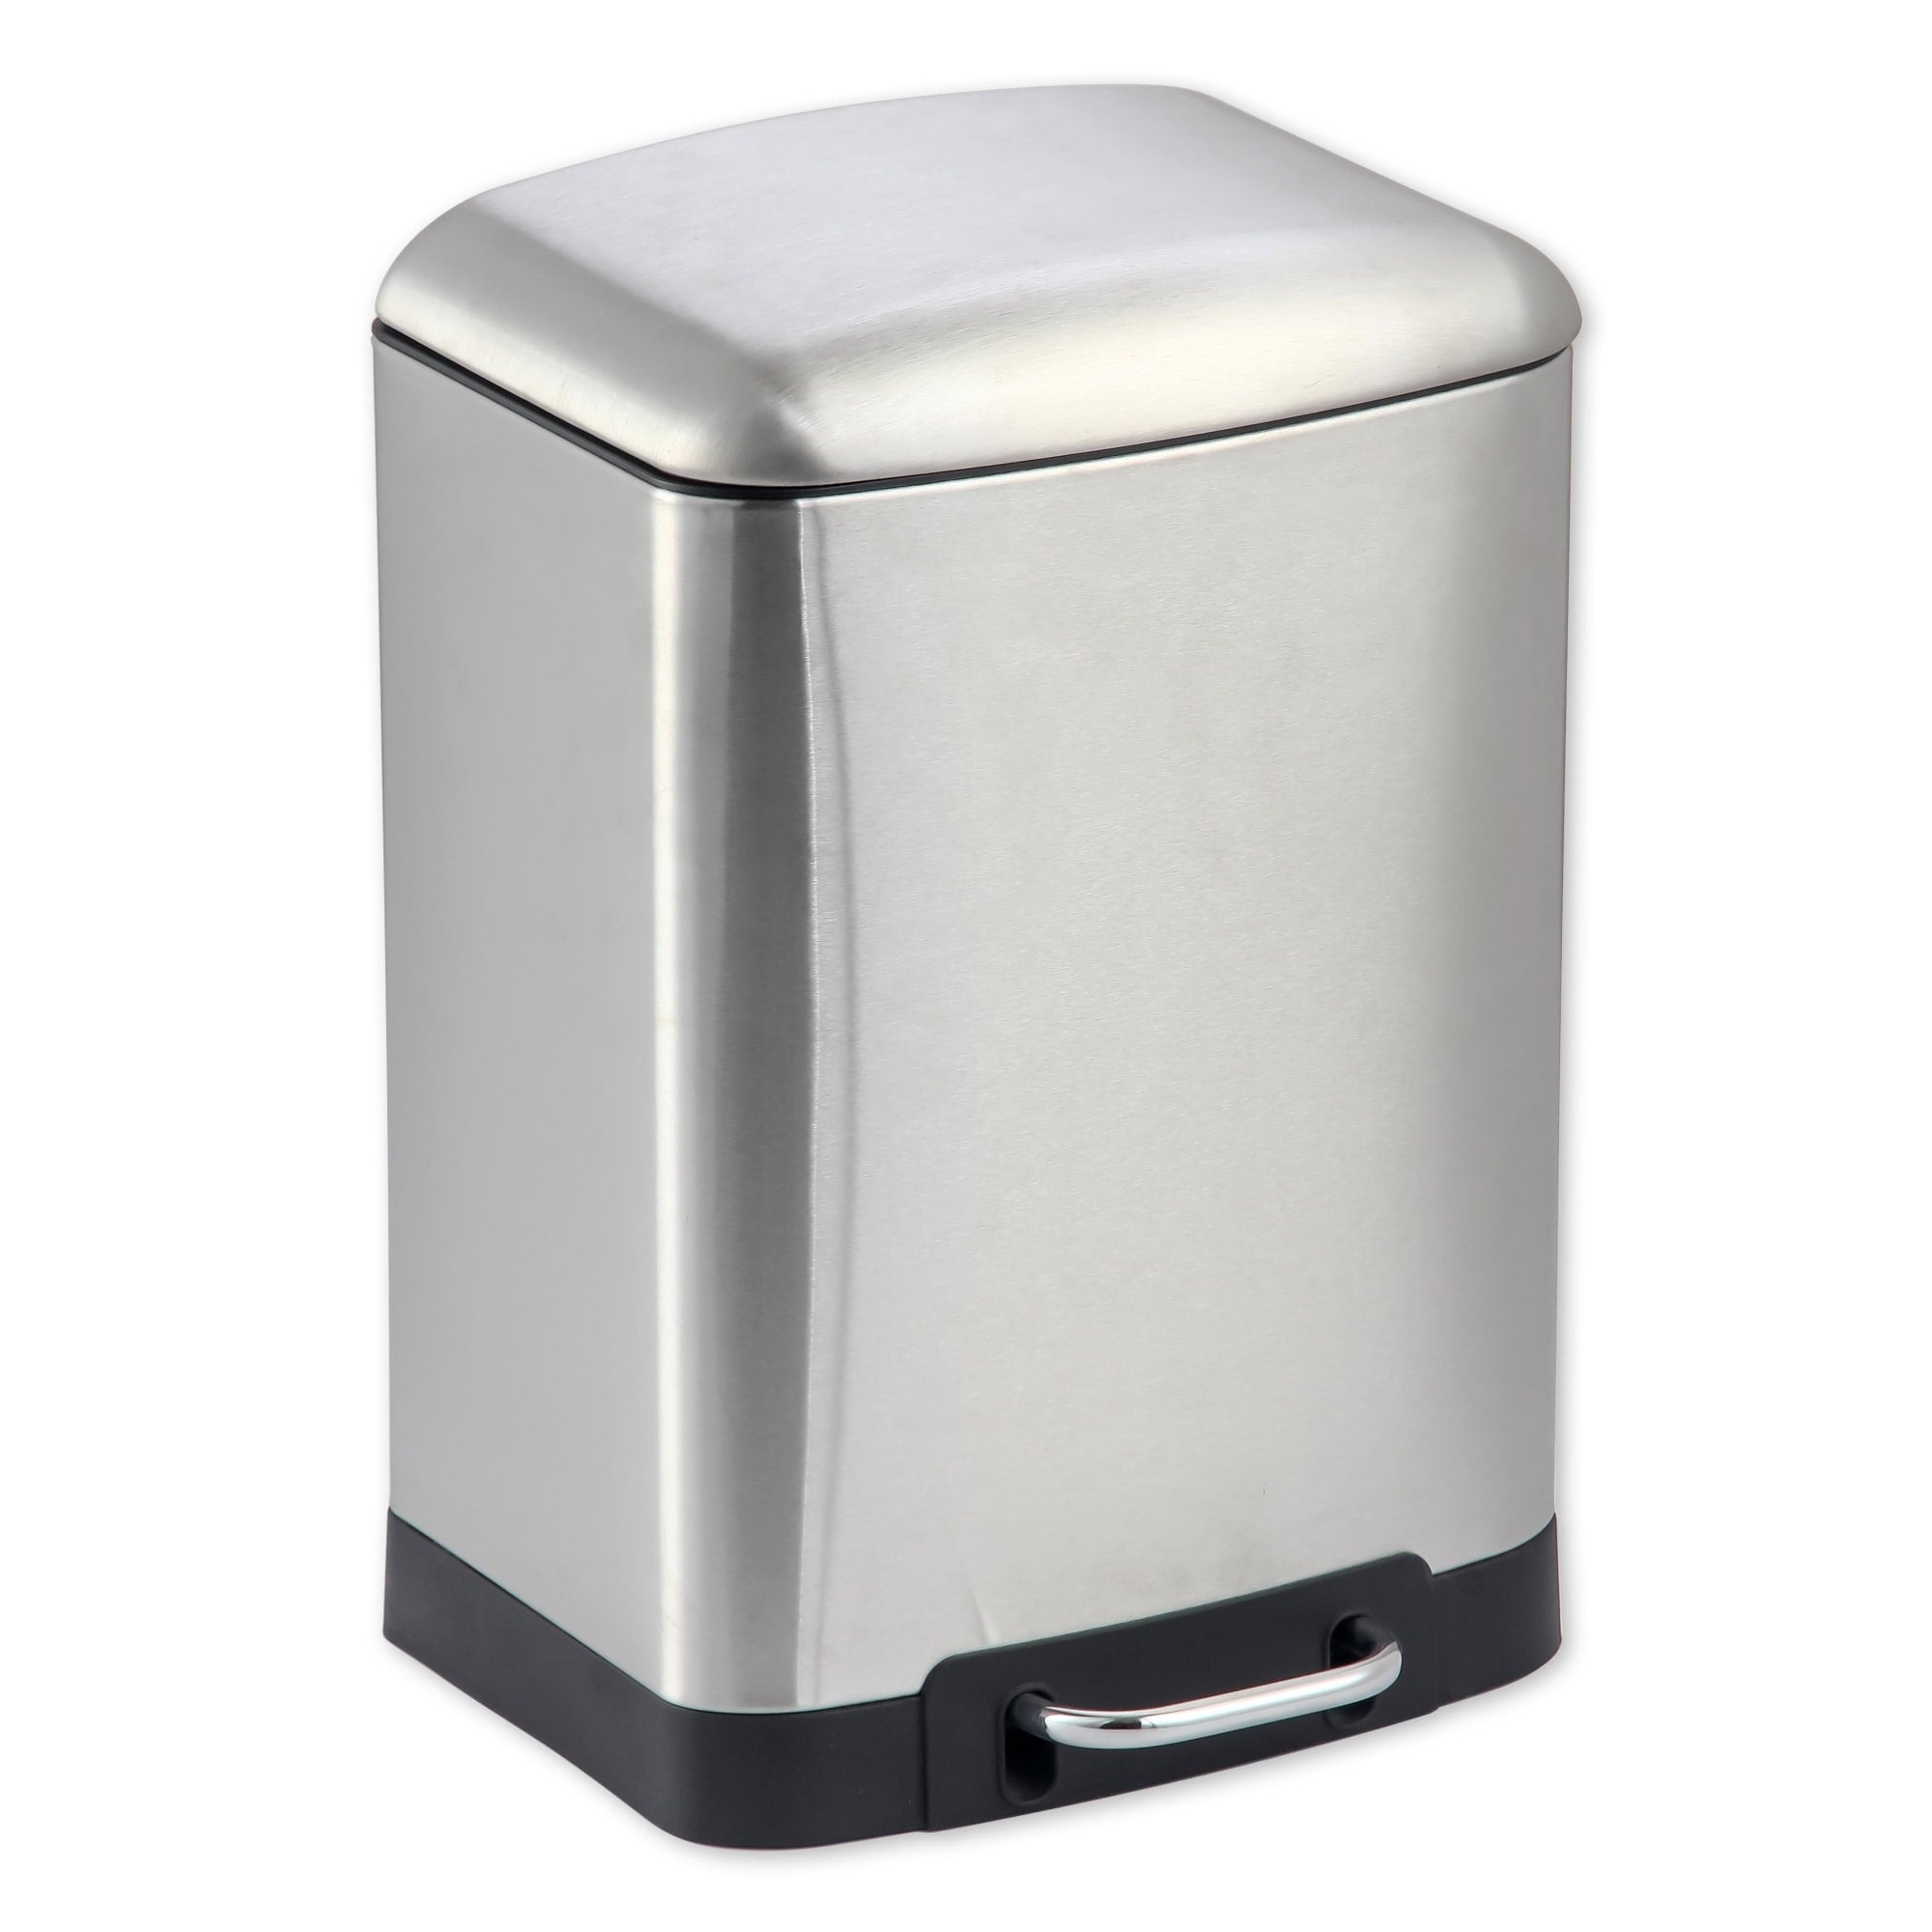 Michael Graves Design Soft Close 12 Liter Step On Stainless Steel Waste Bin, Silver $30 EACH, CASE PACK OF 4